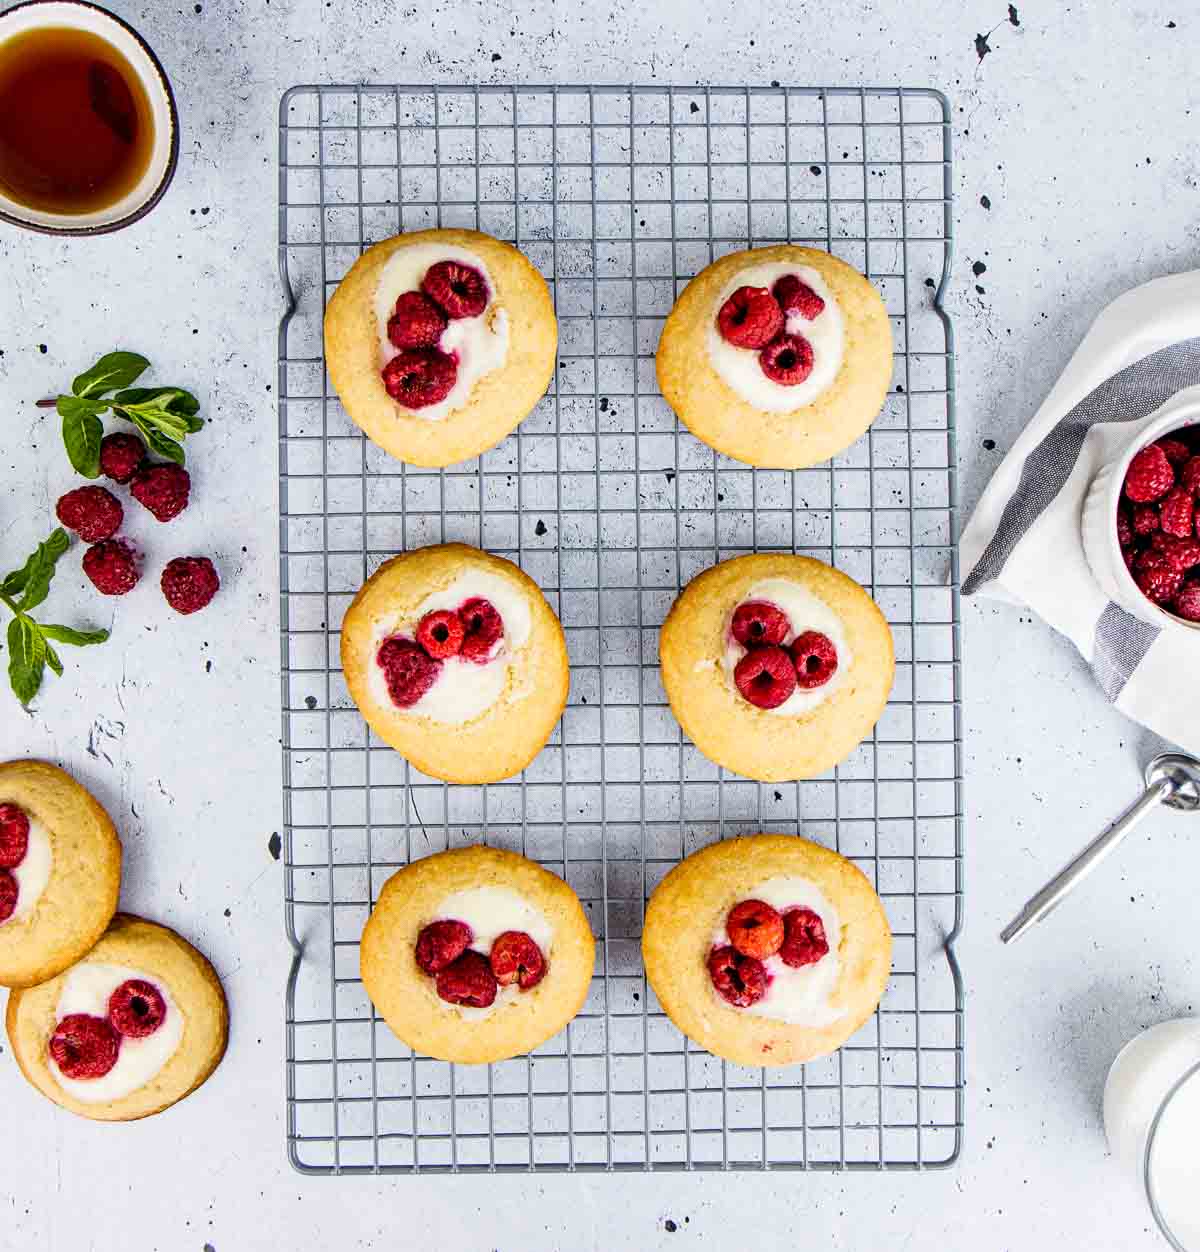 Six raspberry cheesecake cookies on a wire rack, with two more thumbprint cookies on the side.